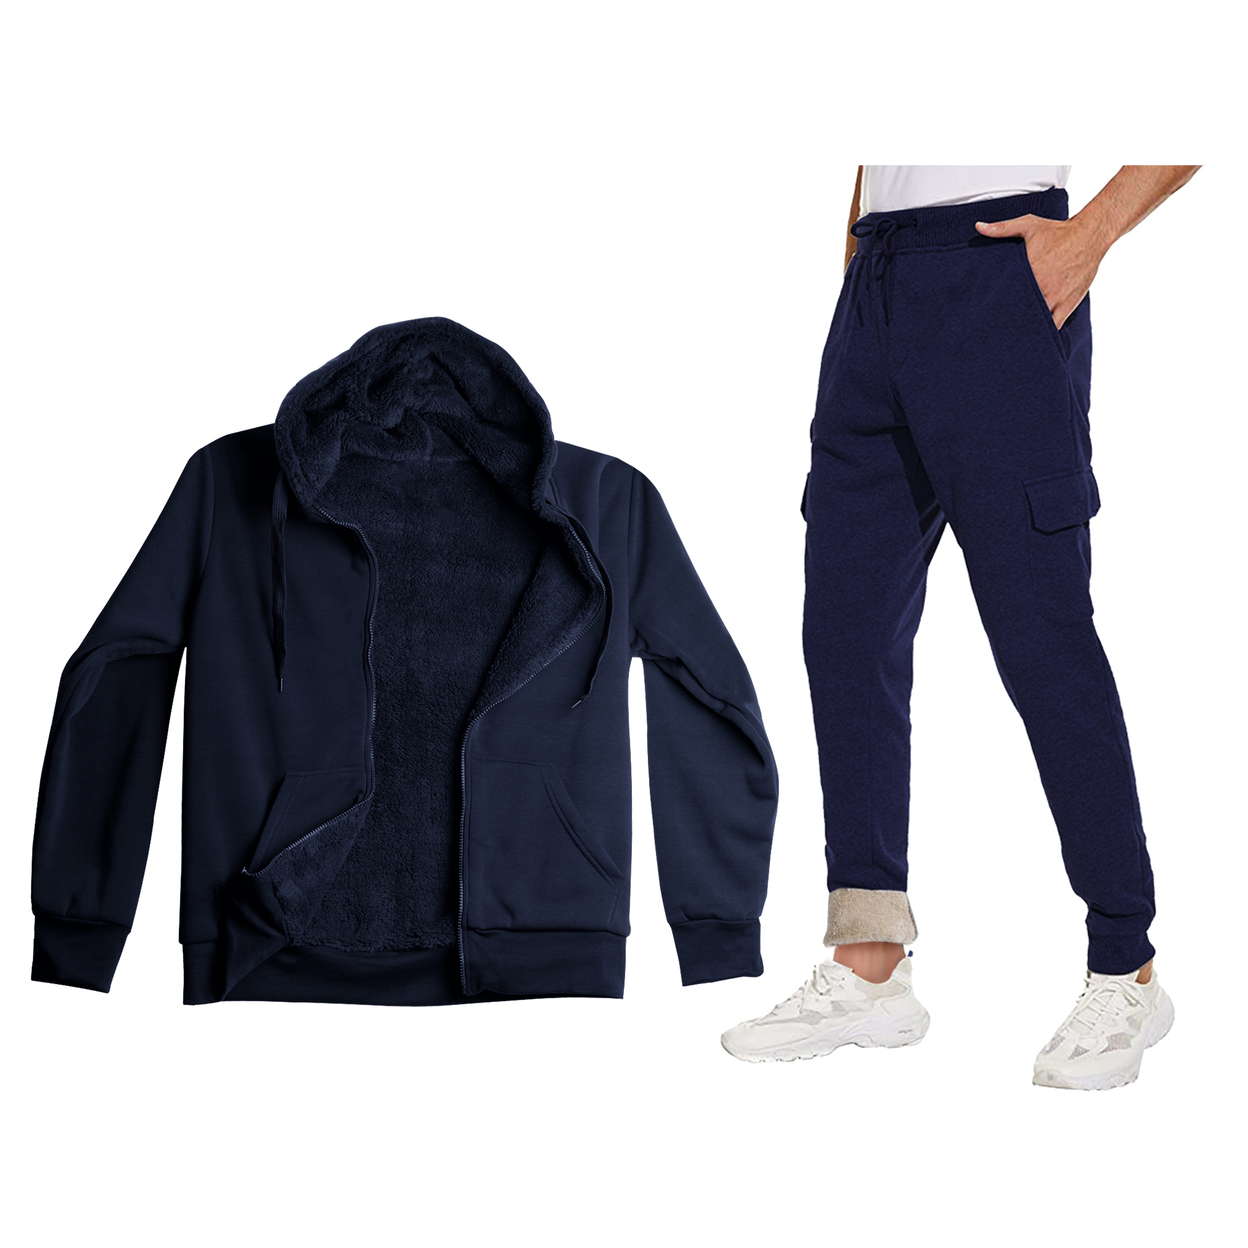 Men's Big & Tall Casual Super Soft Winter Warm Thick Sherpa Lined Sweatsuit Jogger Set - Navy, X-large